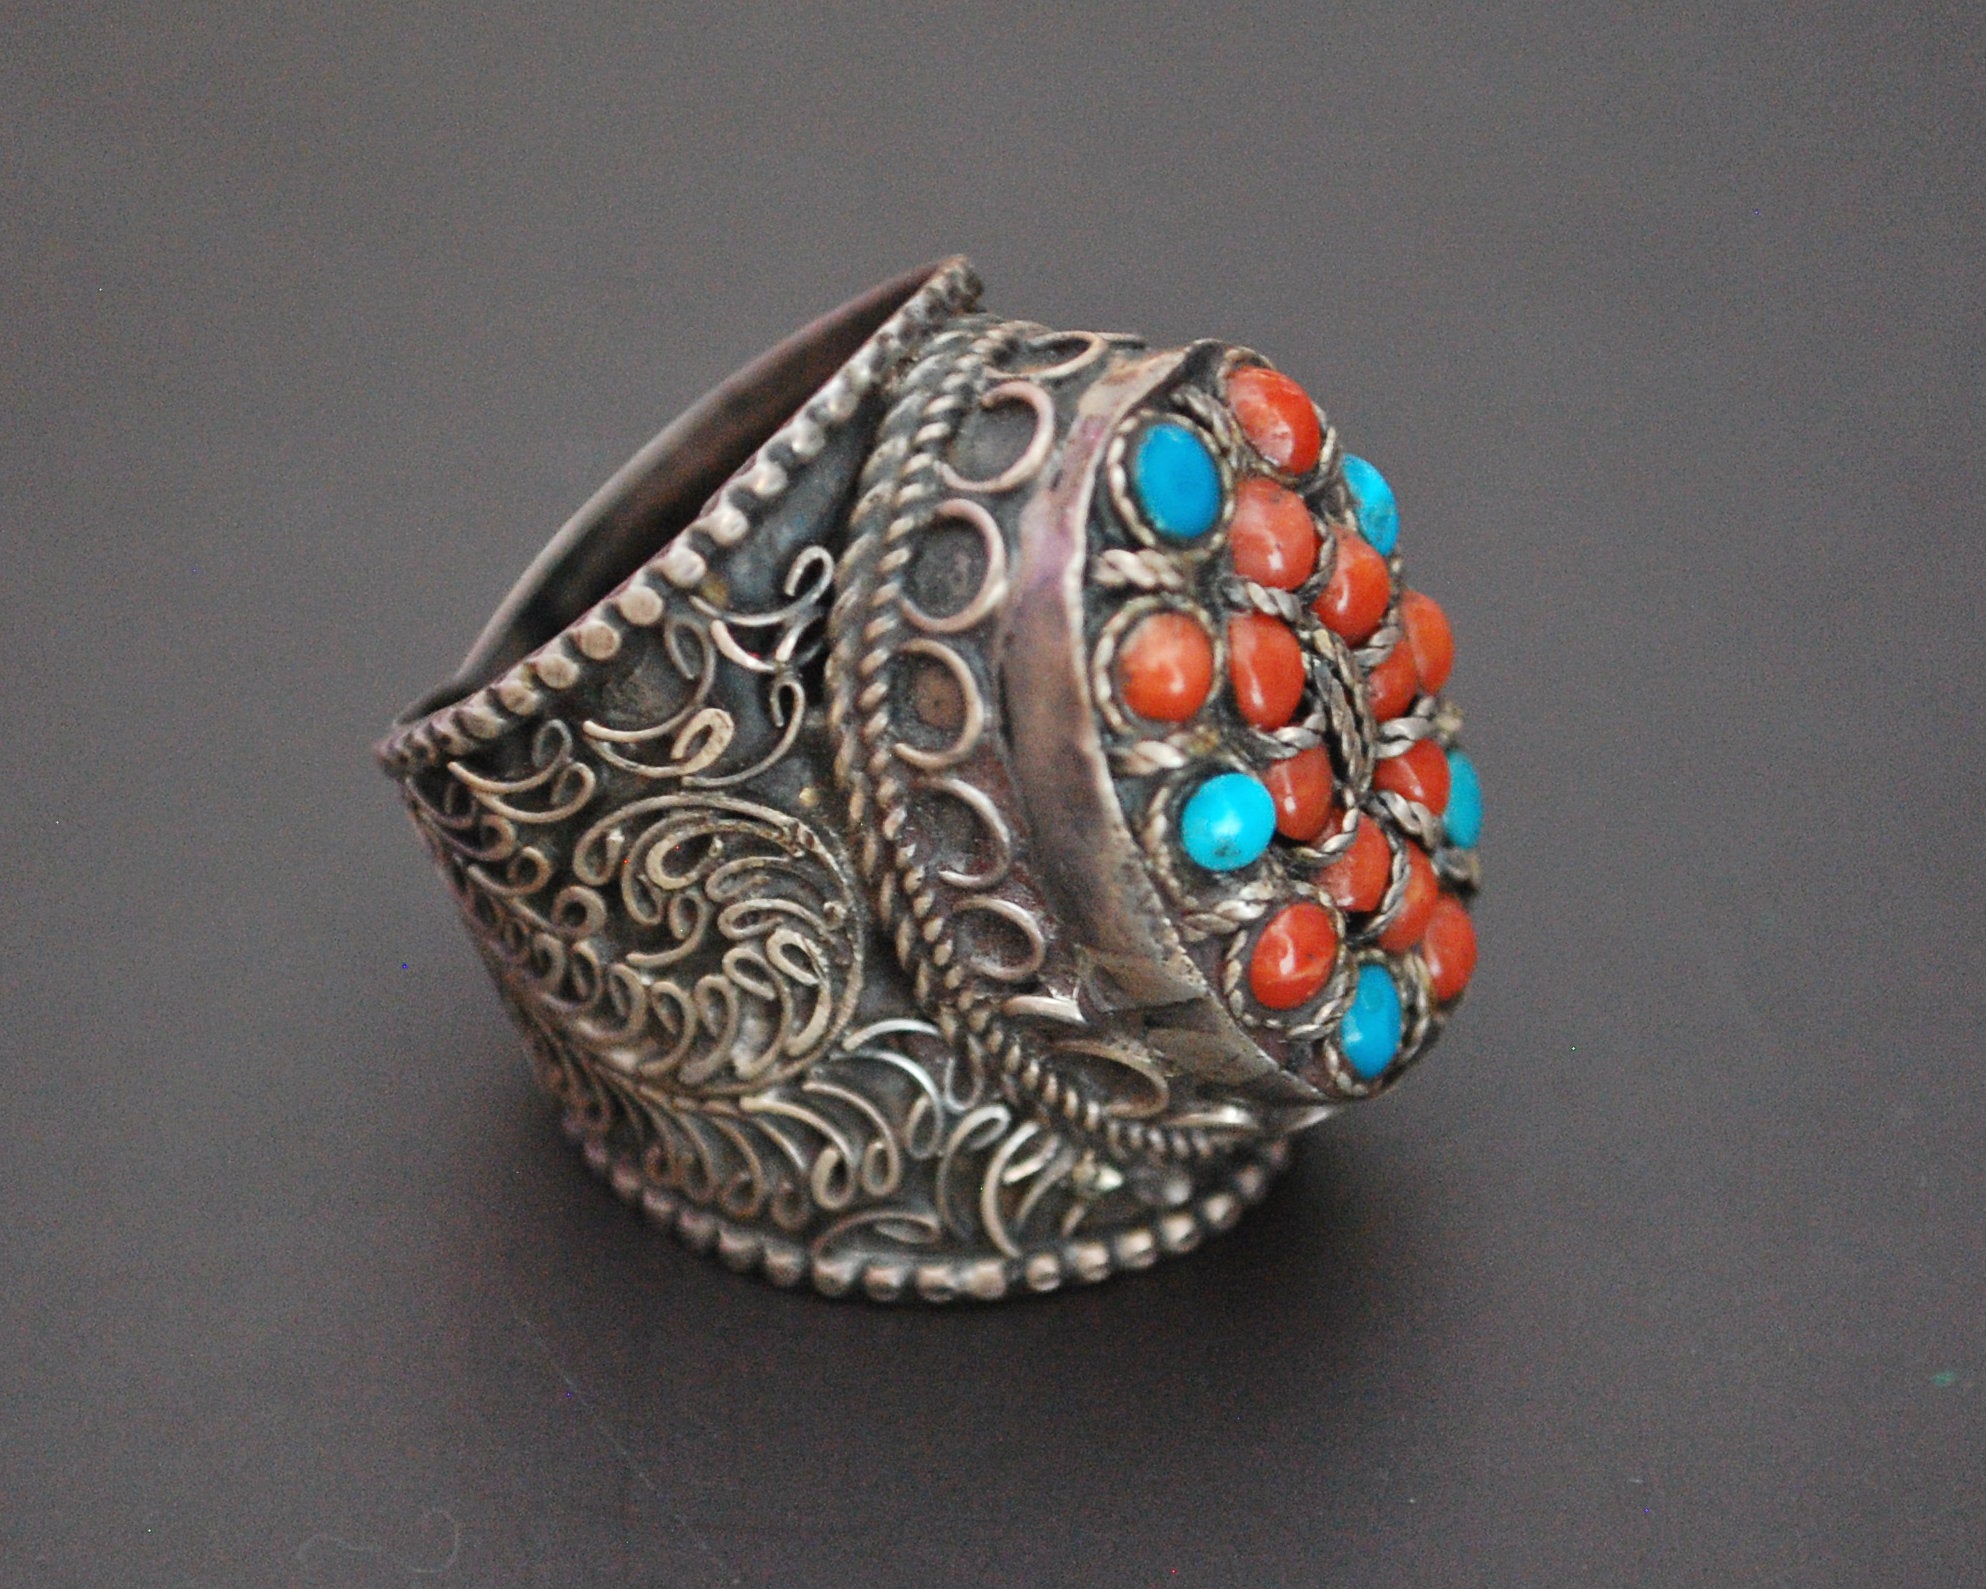 Nepali Turquoise Coral Ring - Size 8.75